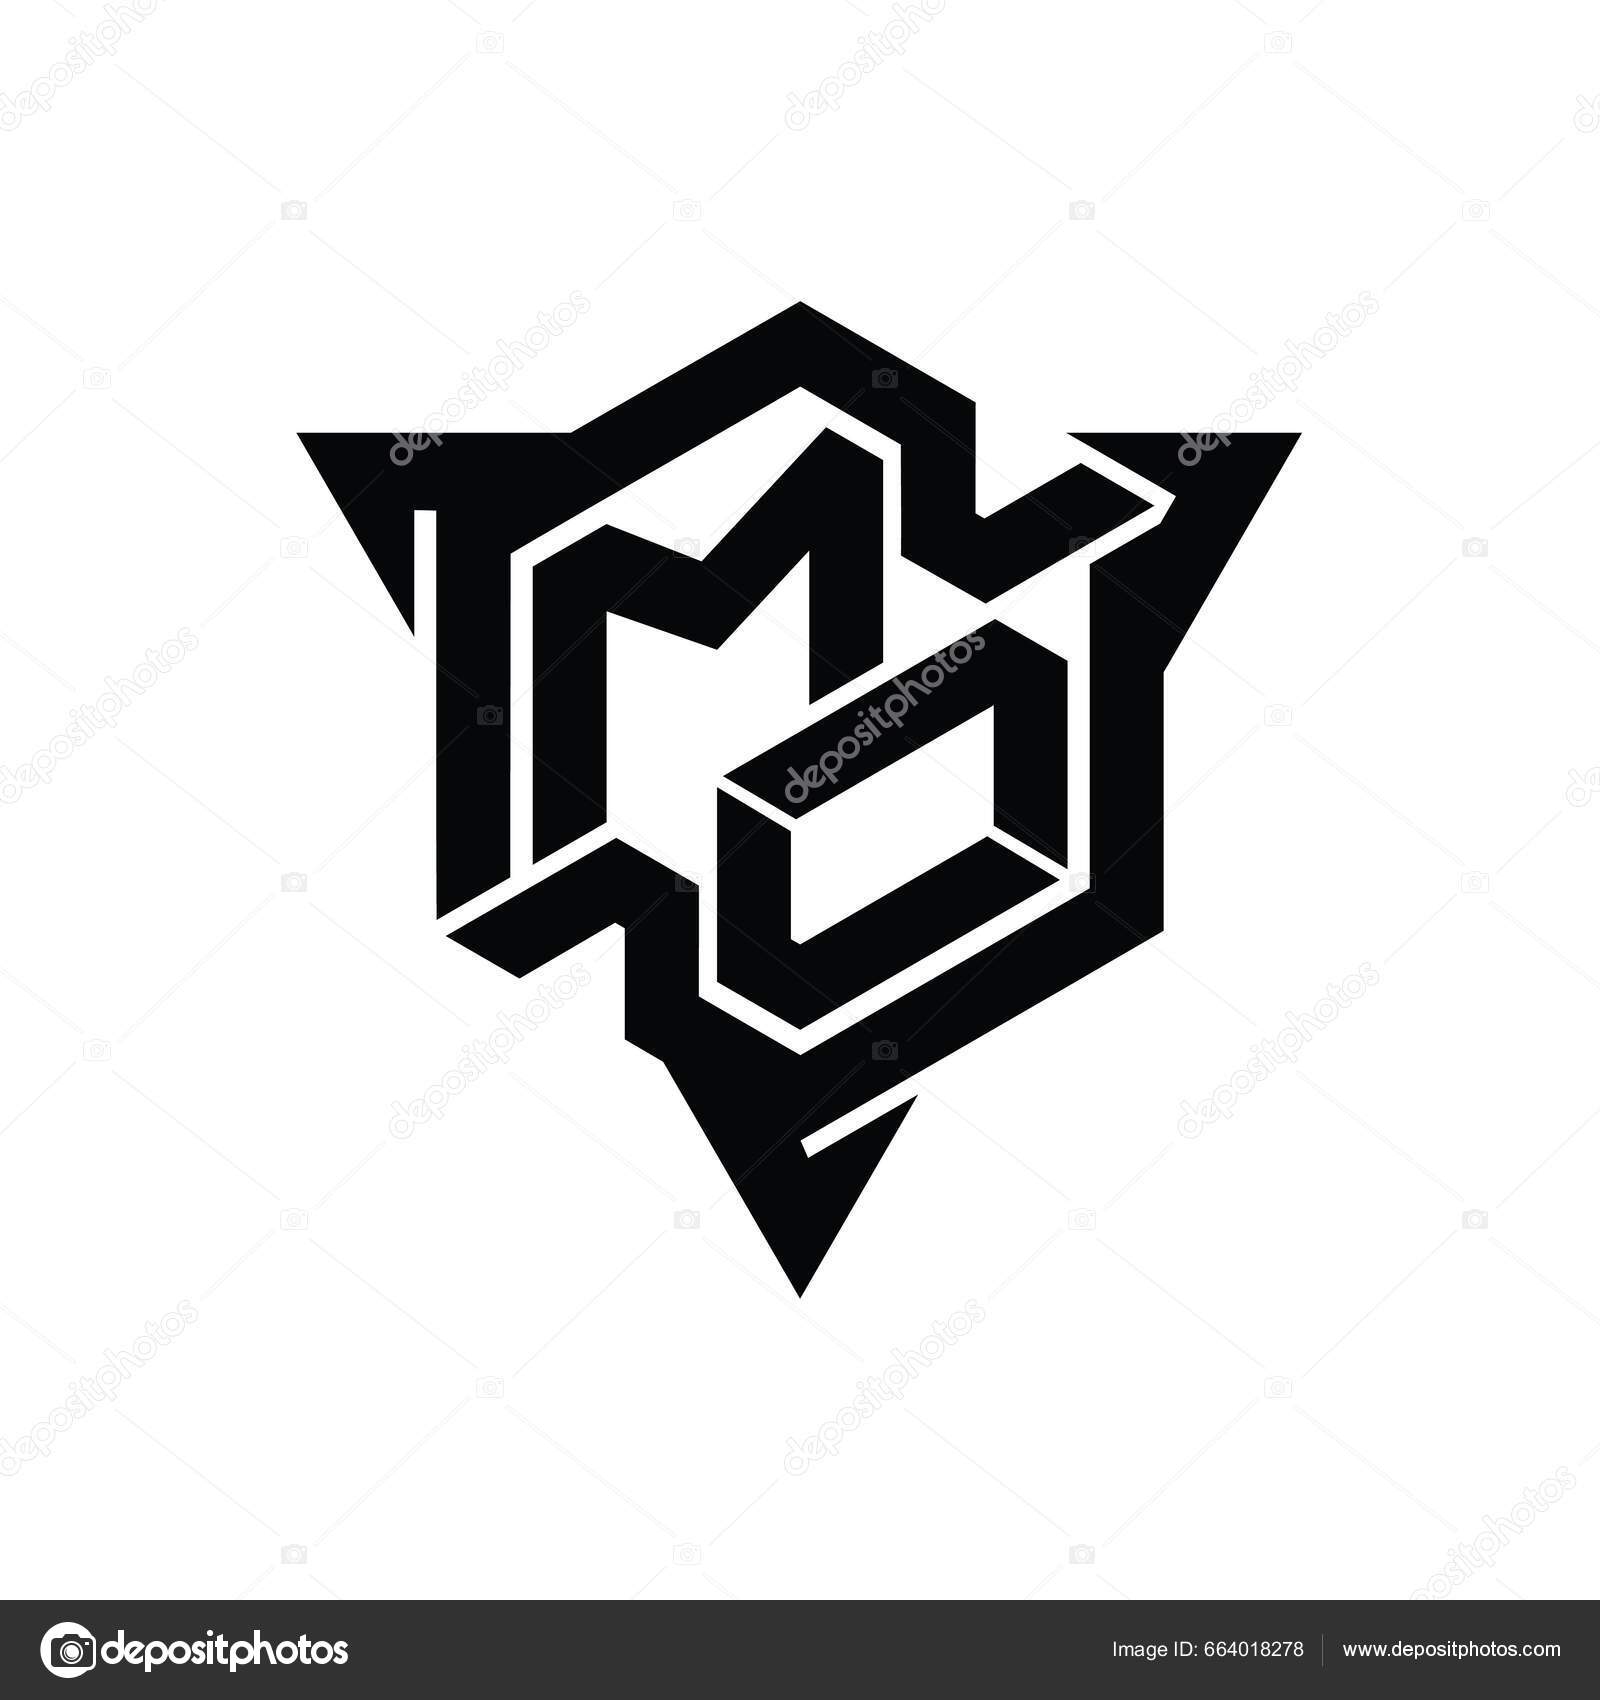 Mm logo monogram with hexagon shape and outline Vector Image